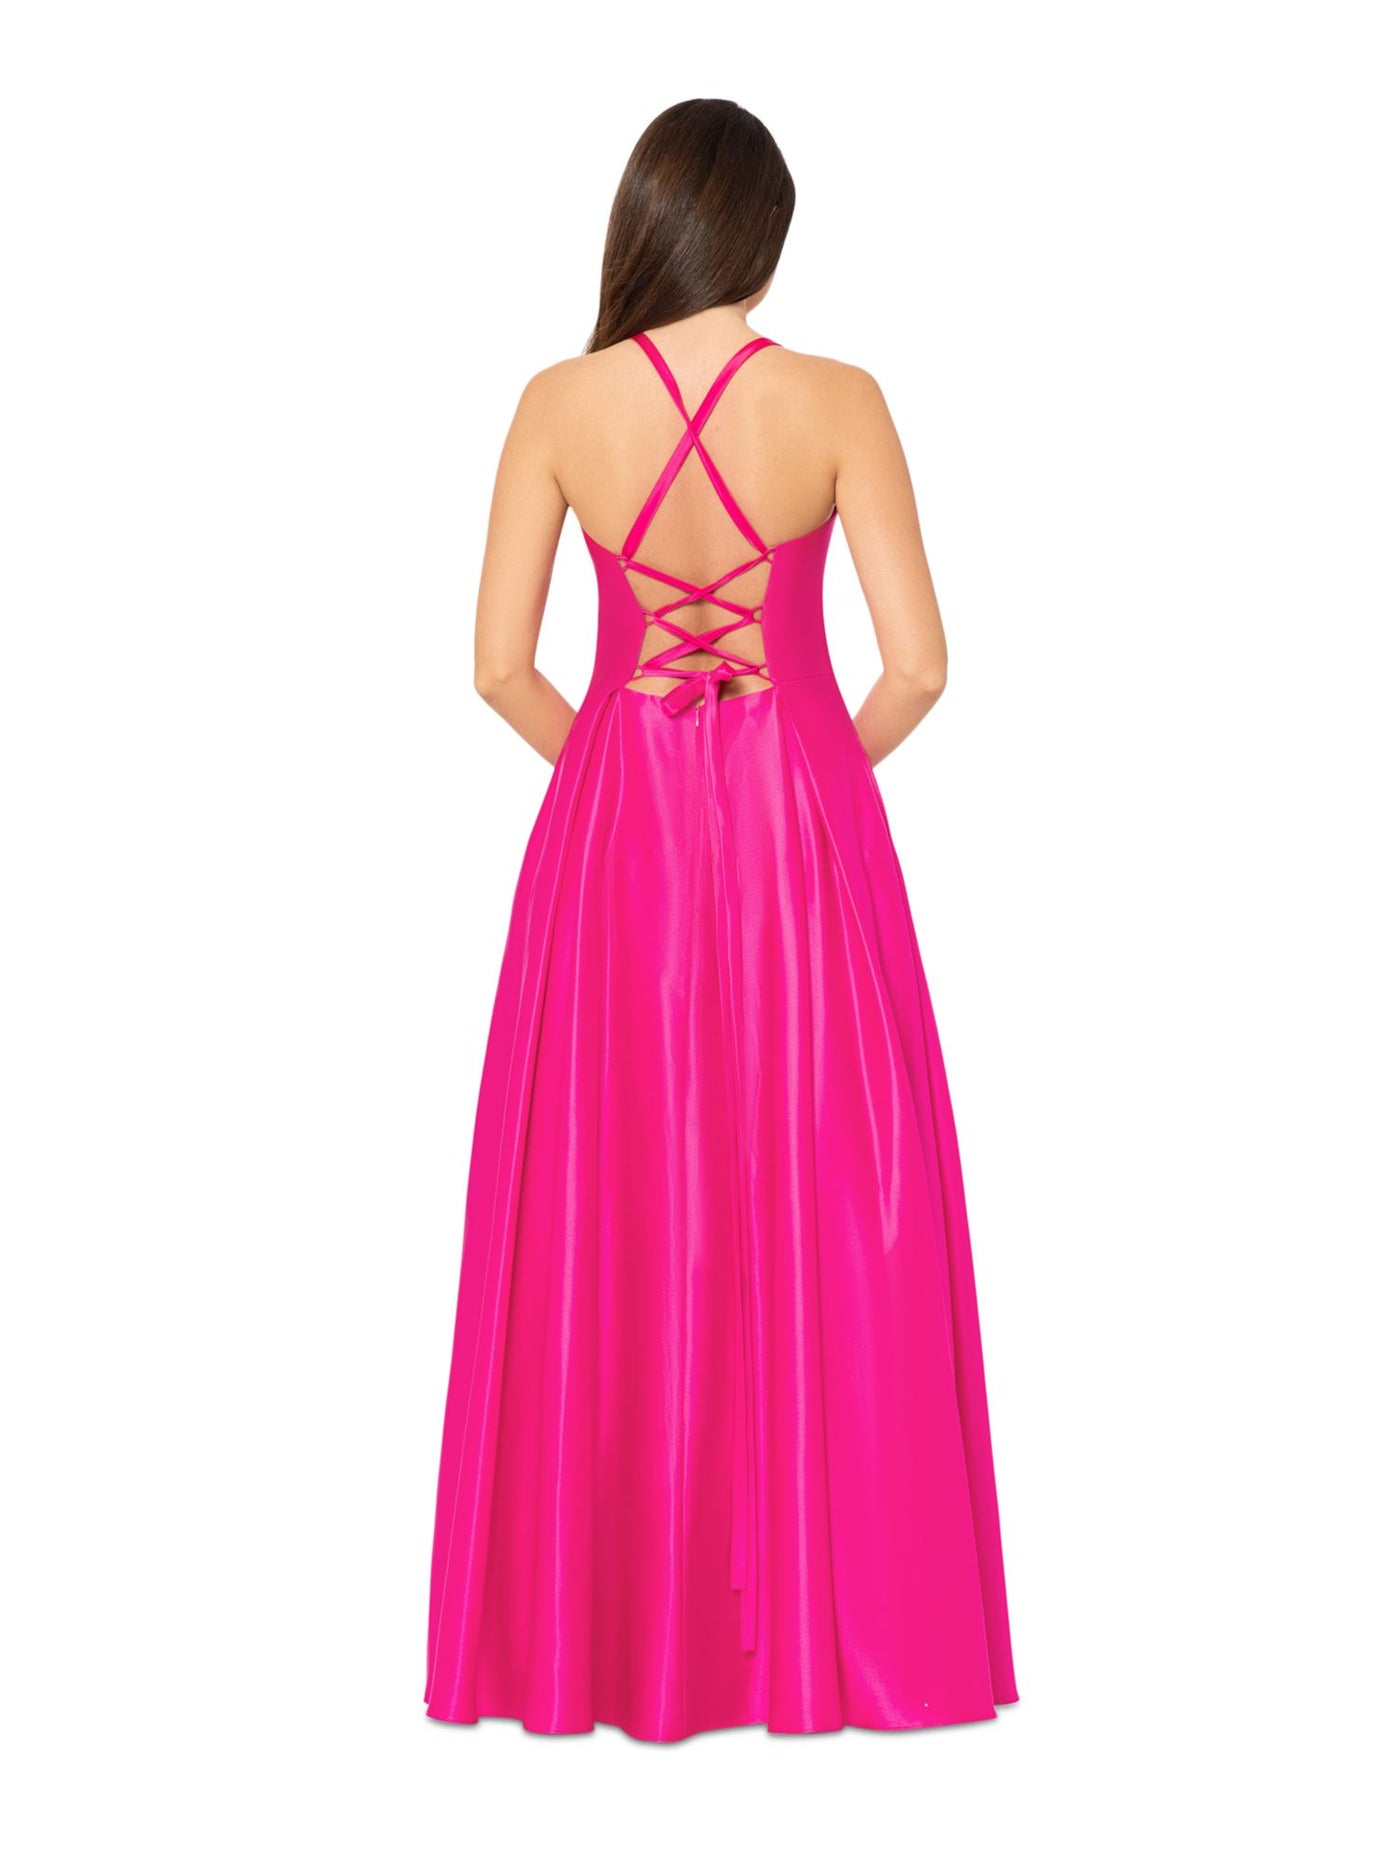 BLONDIE NITES Womens Pink Zippered Pocketed Lace-up Corset Bodice Lined Sleeveless Sweetheart Neckline Full-Length Formal Gown Dress Juniors 11